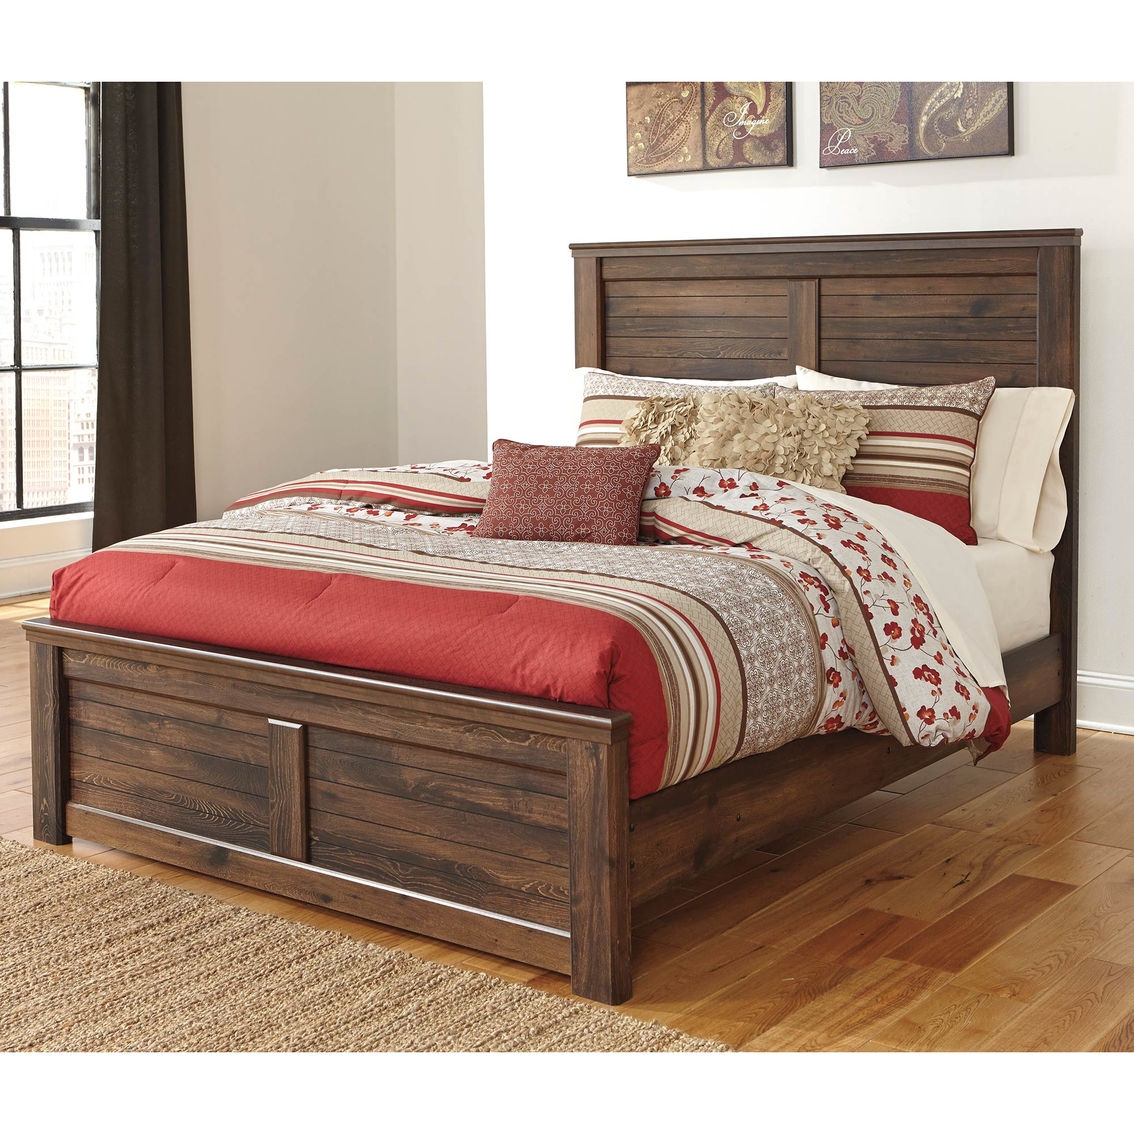 Signature Design by Ashley Quinden Panel Bed 5 pc. Set - Image 2 of 4